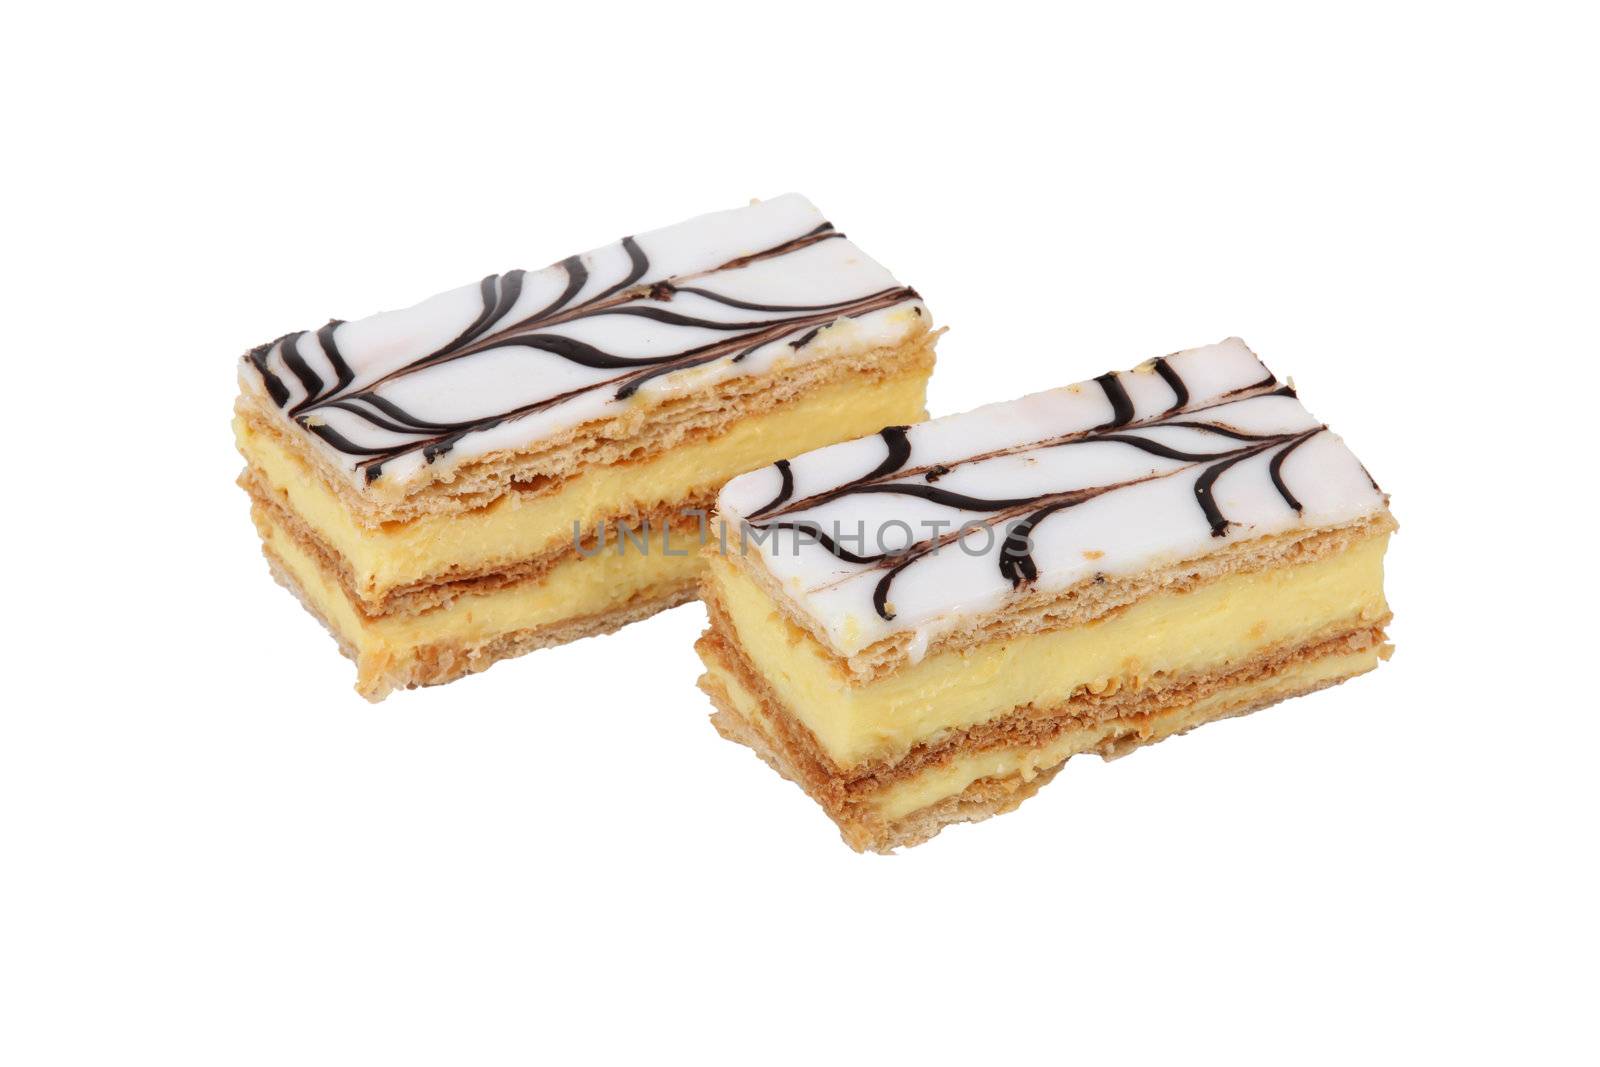 Two mille-feuille pastries by phovoir